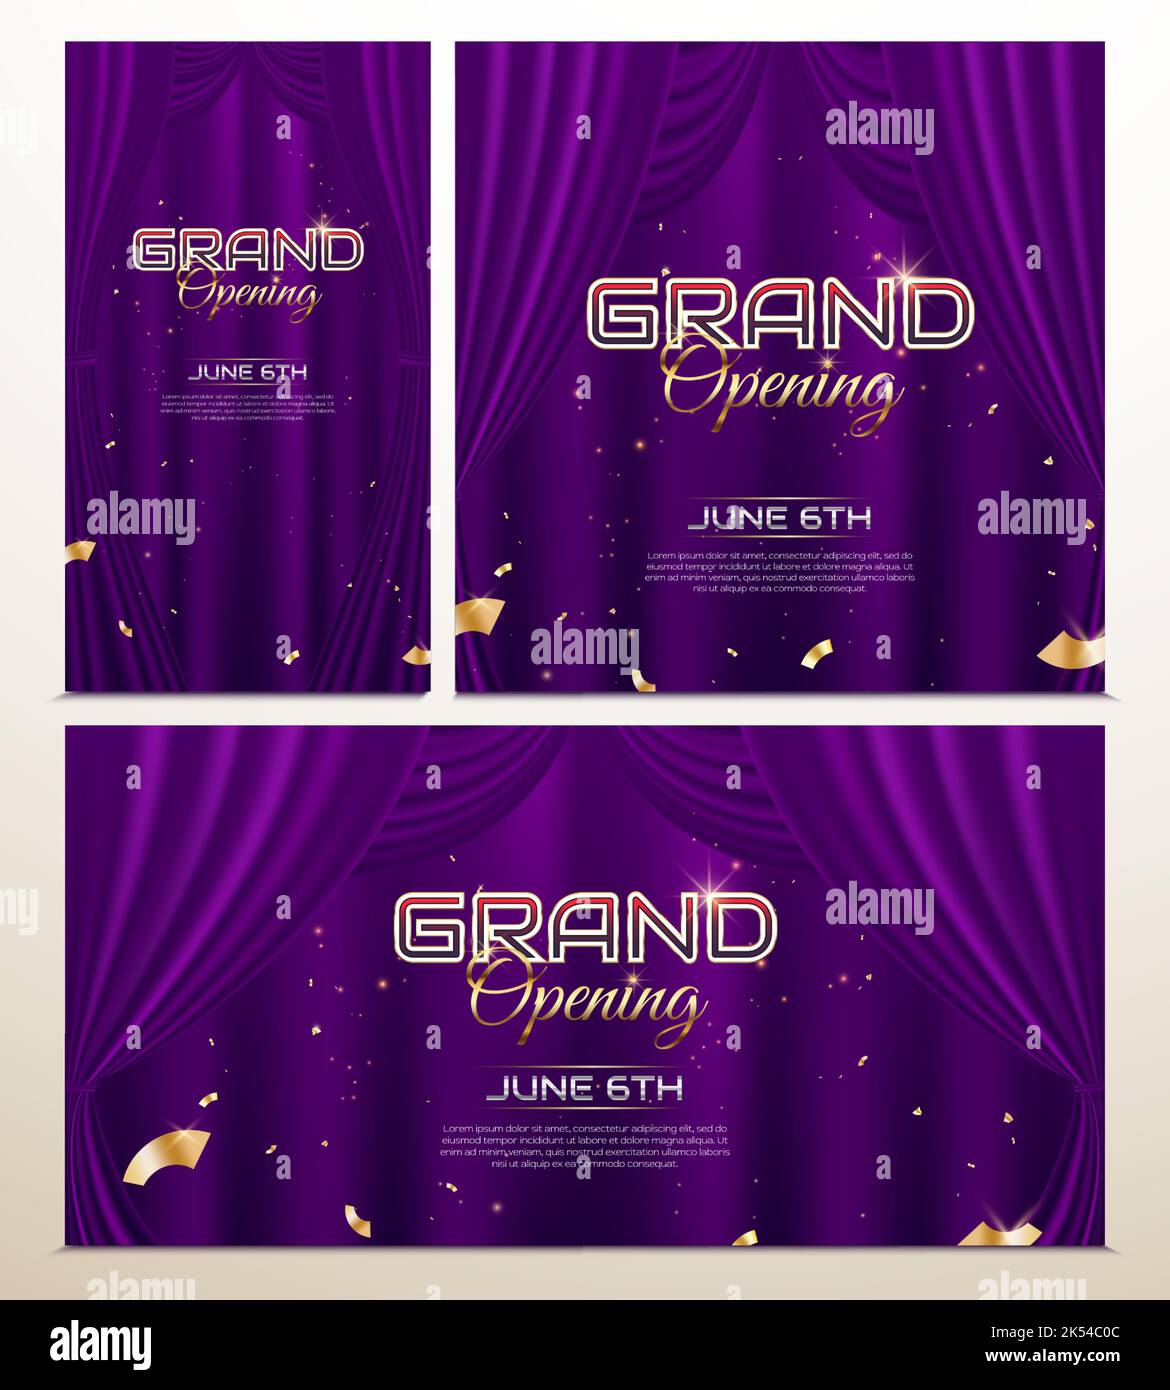 Stylish grand opening ceremony card design Vector Image